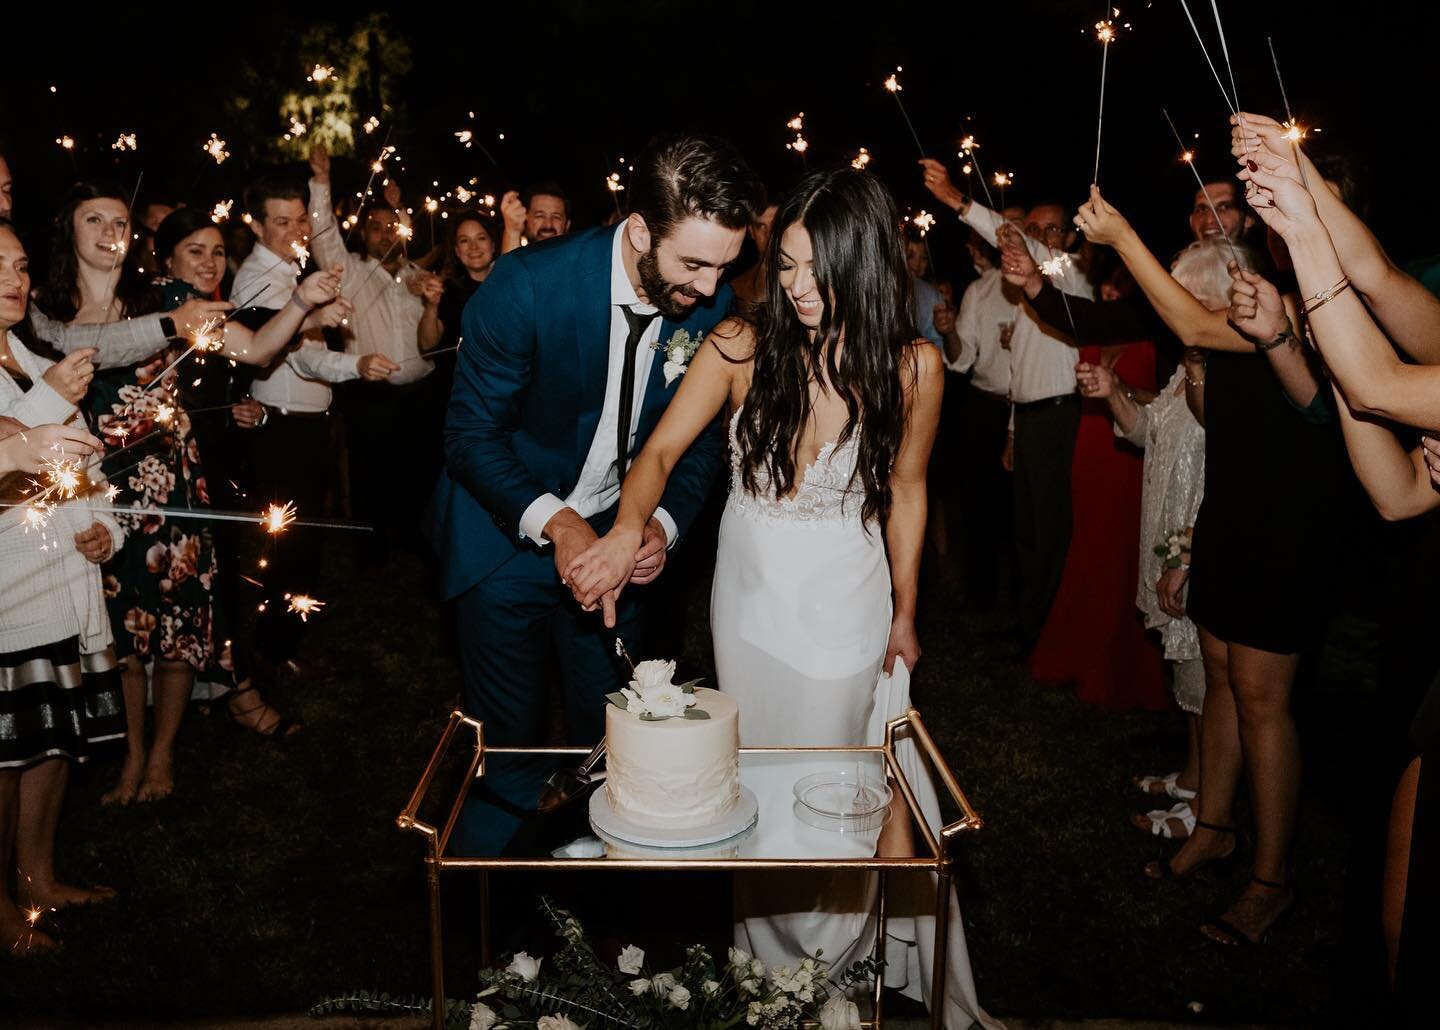 The cutest little sparkler cake cutting I&rsquo;ve ever seen 😍❤️✨Finally blogged this dreamy wedding (about a year later than I wanted to loll), go check out the full post! Link in bio! 😘
&bull;
&bull;
&bull;
&bull;
&bull;
&bull;
&bull;
&bull;
&bul